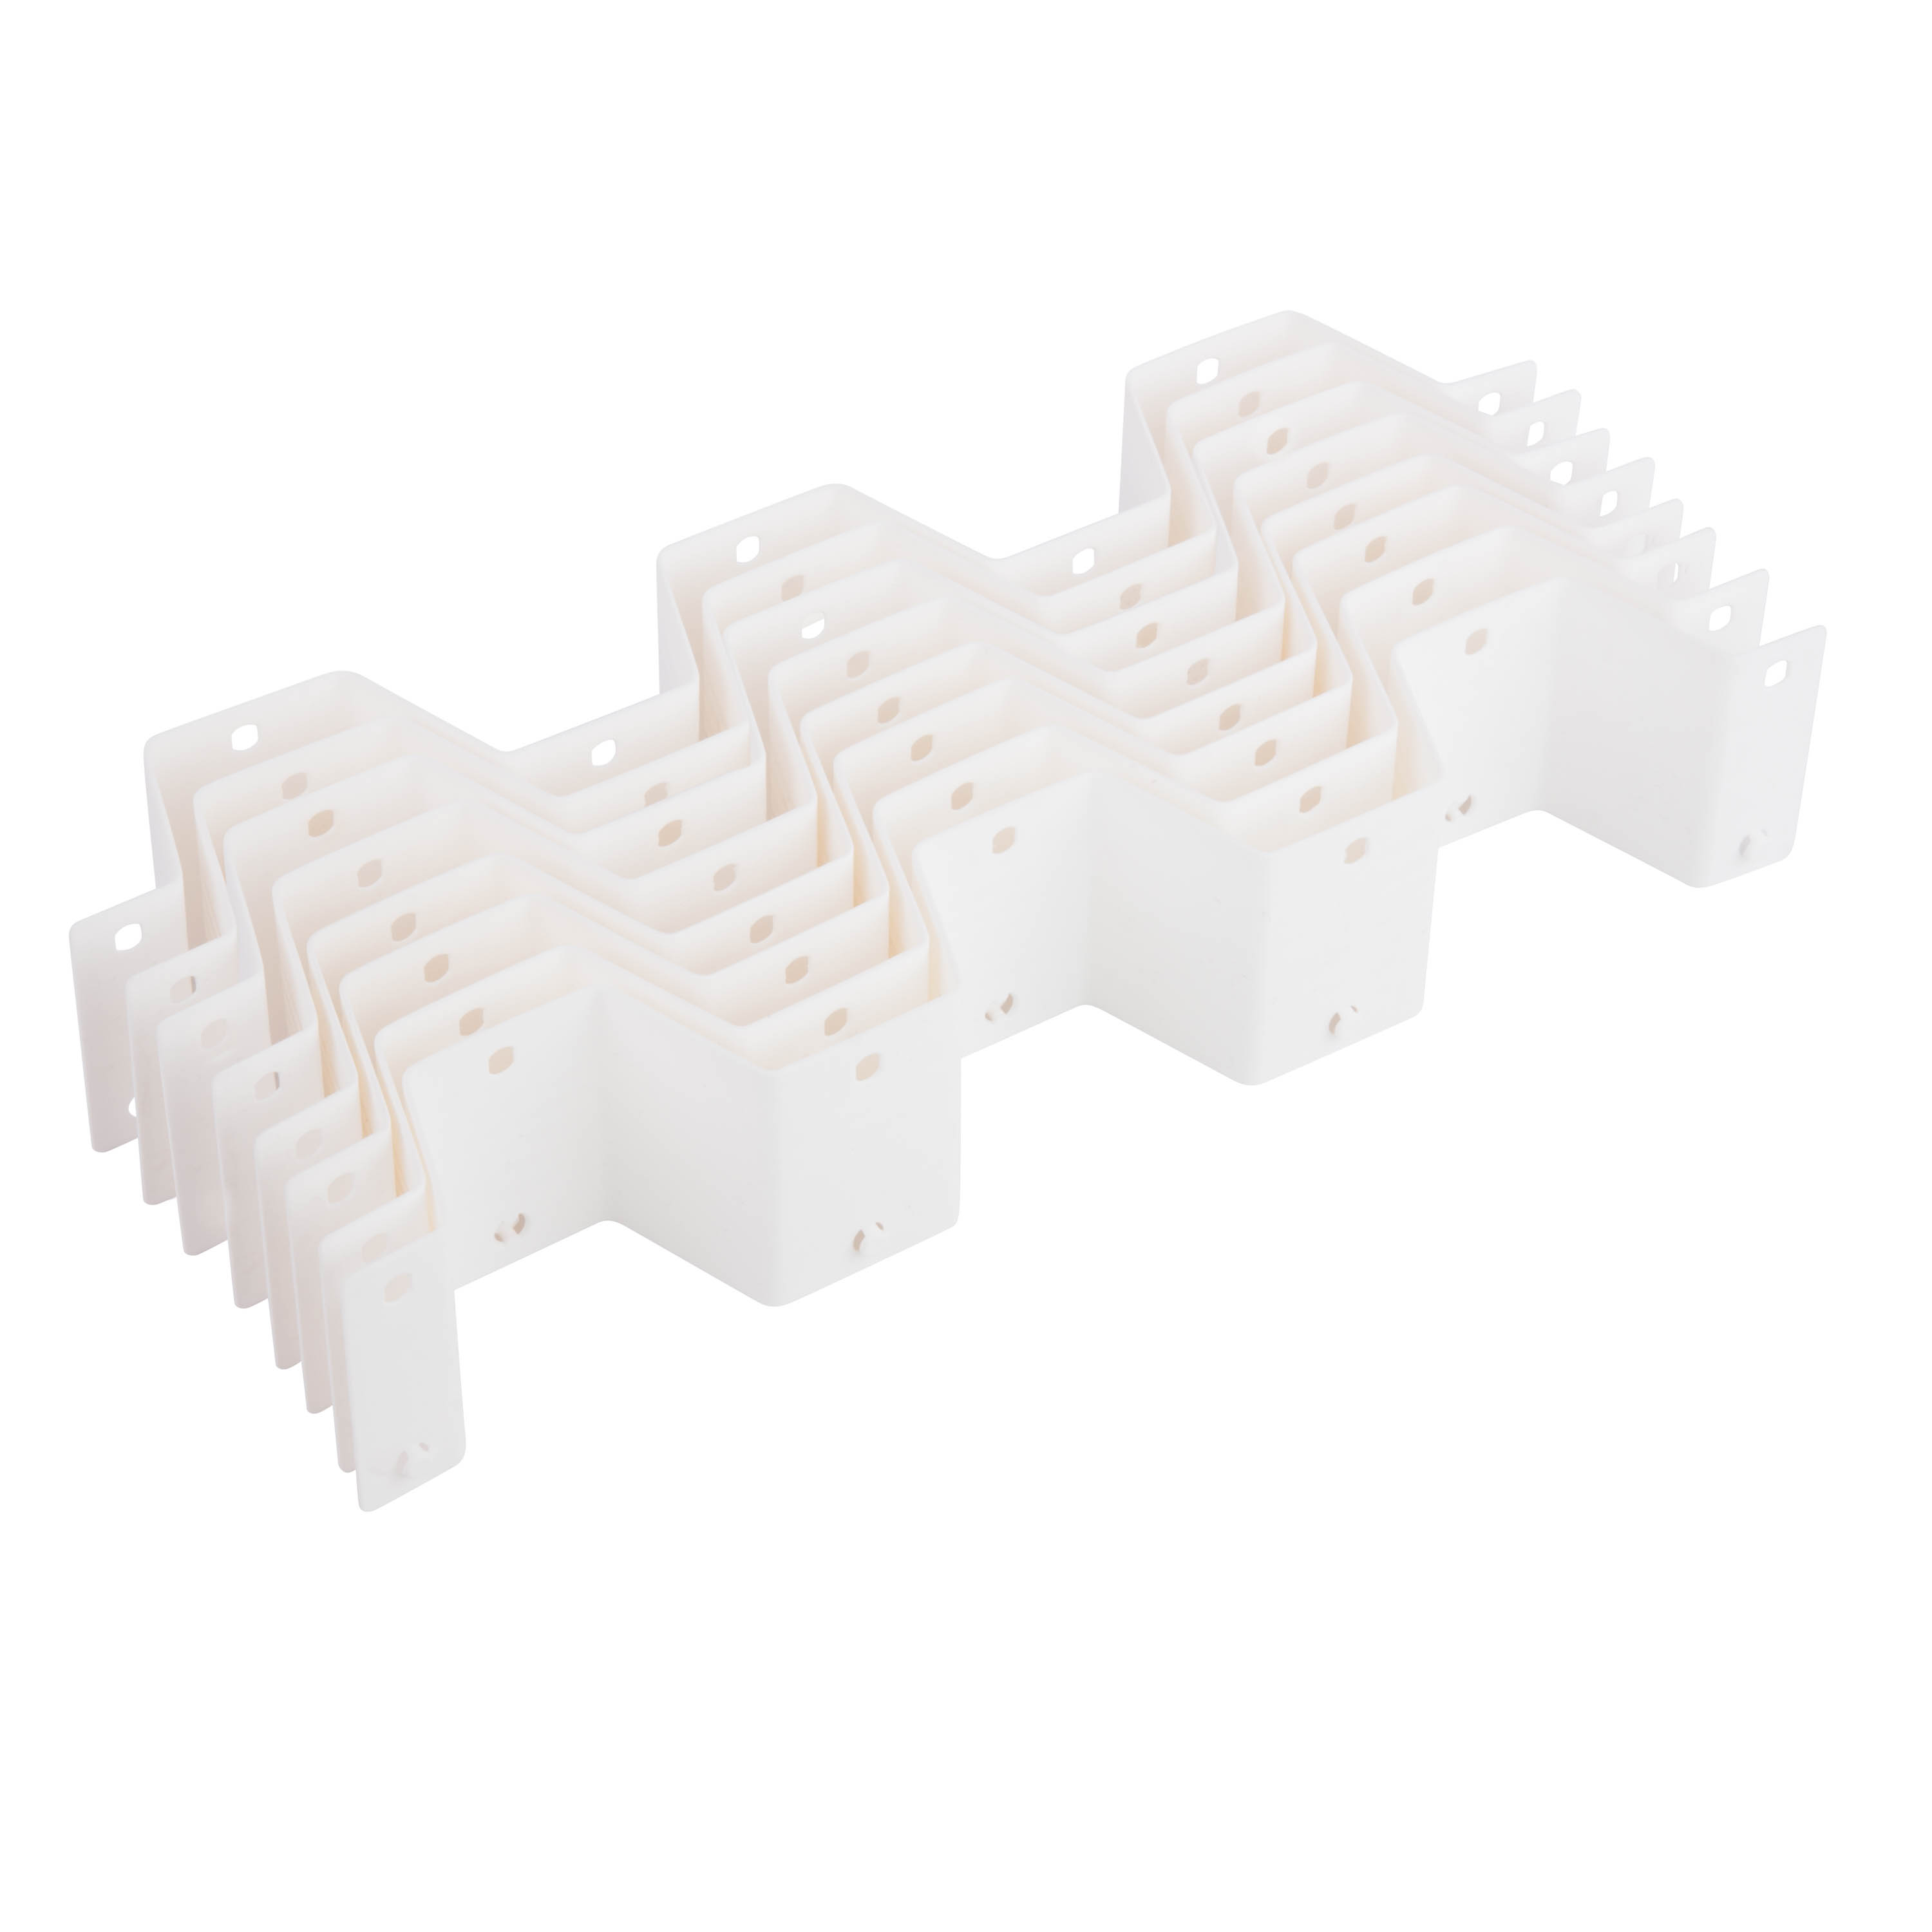 Honey-Can-Do Plastic Modular 32-Compartment Drawer Organizer for Clothes, White - image 4 of 4